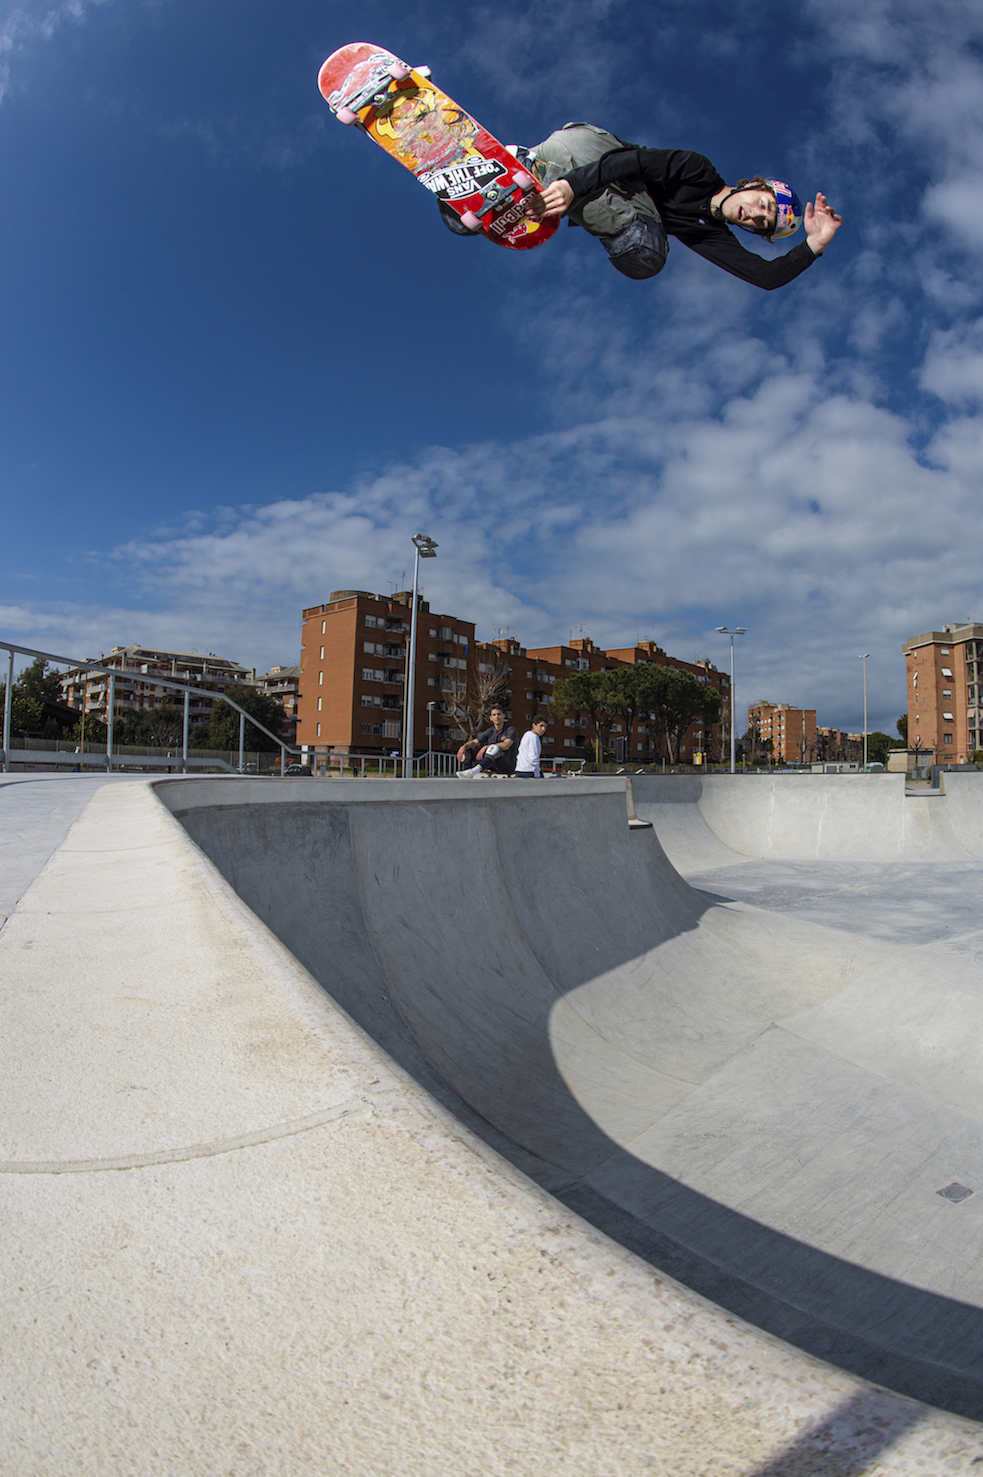 Alessandro Mazzara performs at the Ostia Skatepark in Rome, Italy on March 26, 2021 // Piero Capannini / Red Bull Content Pool // SI202103300173 // Usage for editorial use only // 